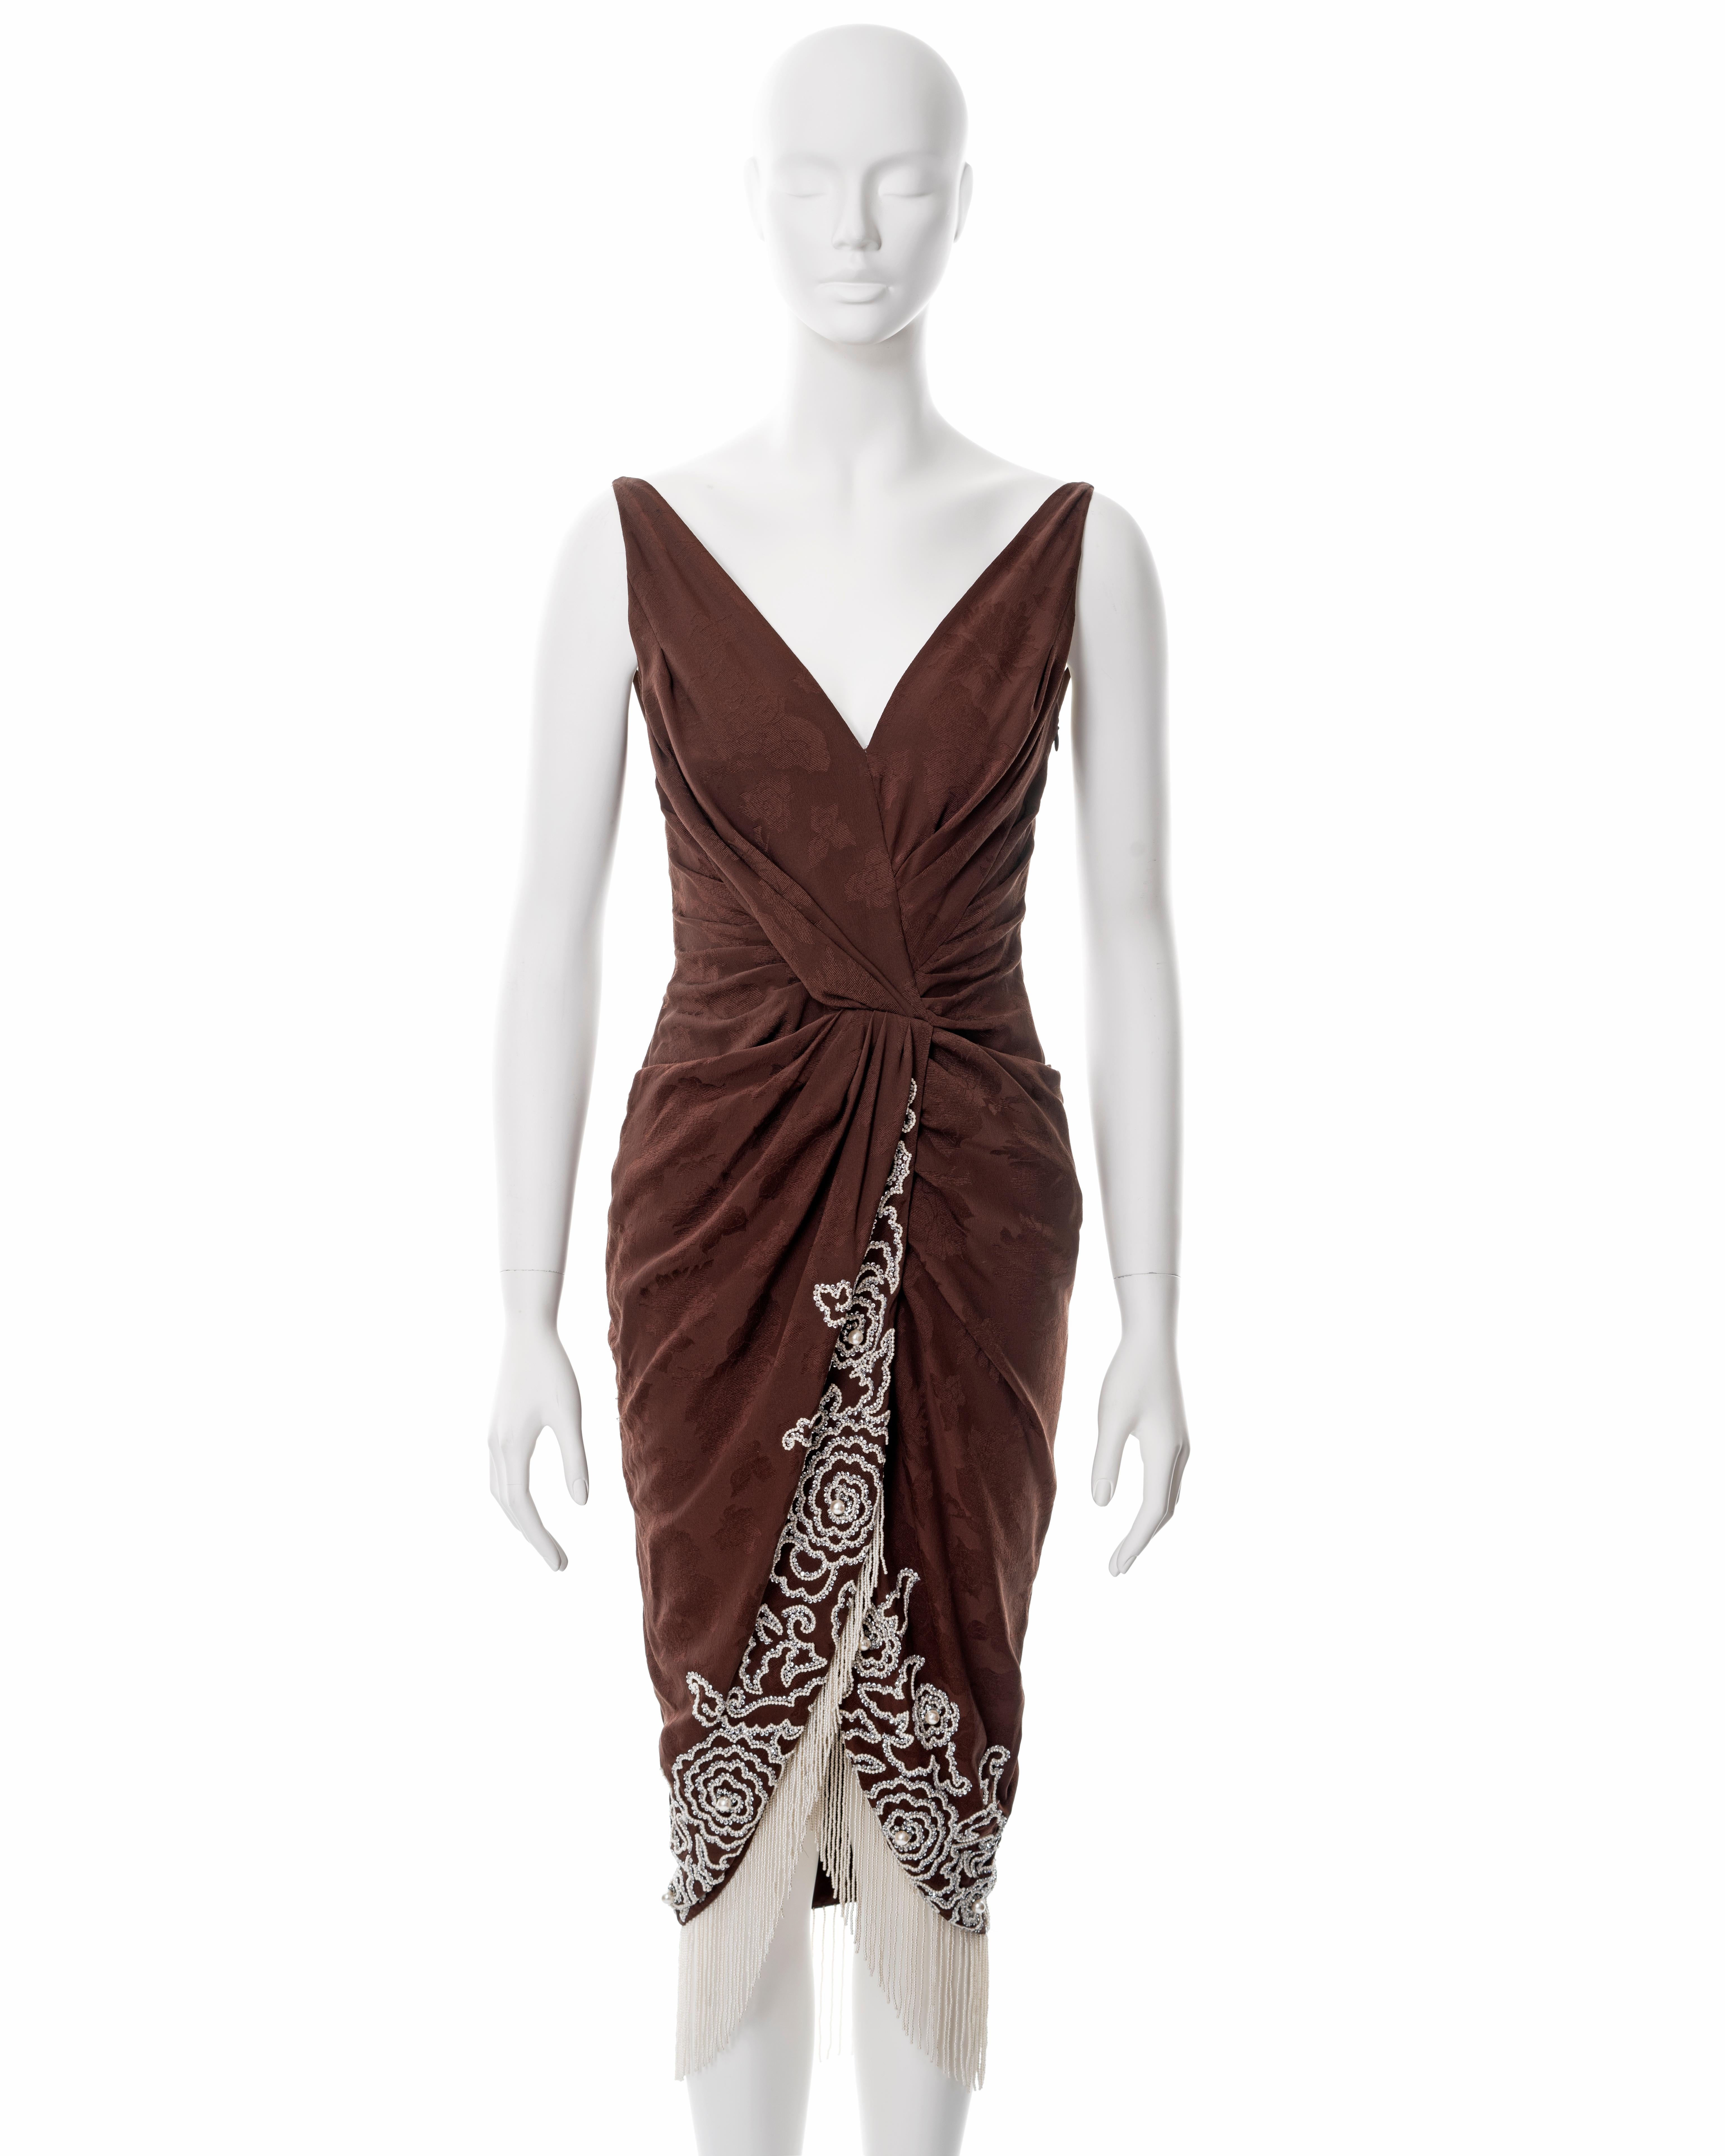 ▪ Christian Dior cocktail dress
▪ Designed by John Galliano
▪ Sold by One of a Kind Archive
▪ Spring-Summer 2008
▪ Constructed from brown silk jacquard 
▪ Beaded and fringed with faux pearls 
▪ Draped bodice and skirt 
▪ FR 36 - UK 8 - US 4
▪ Made